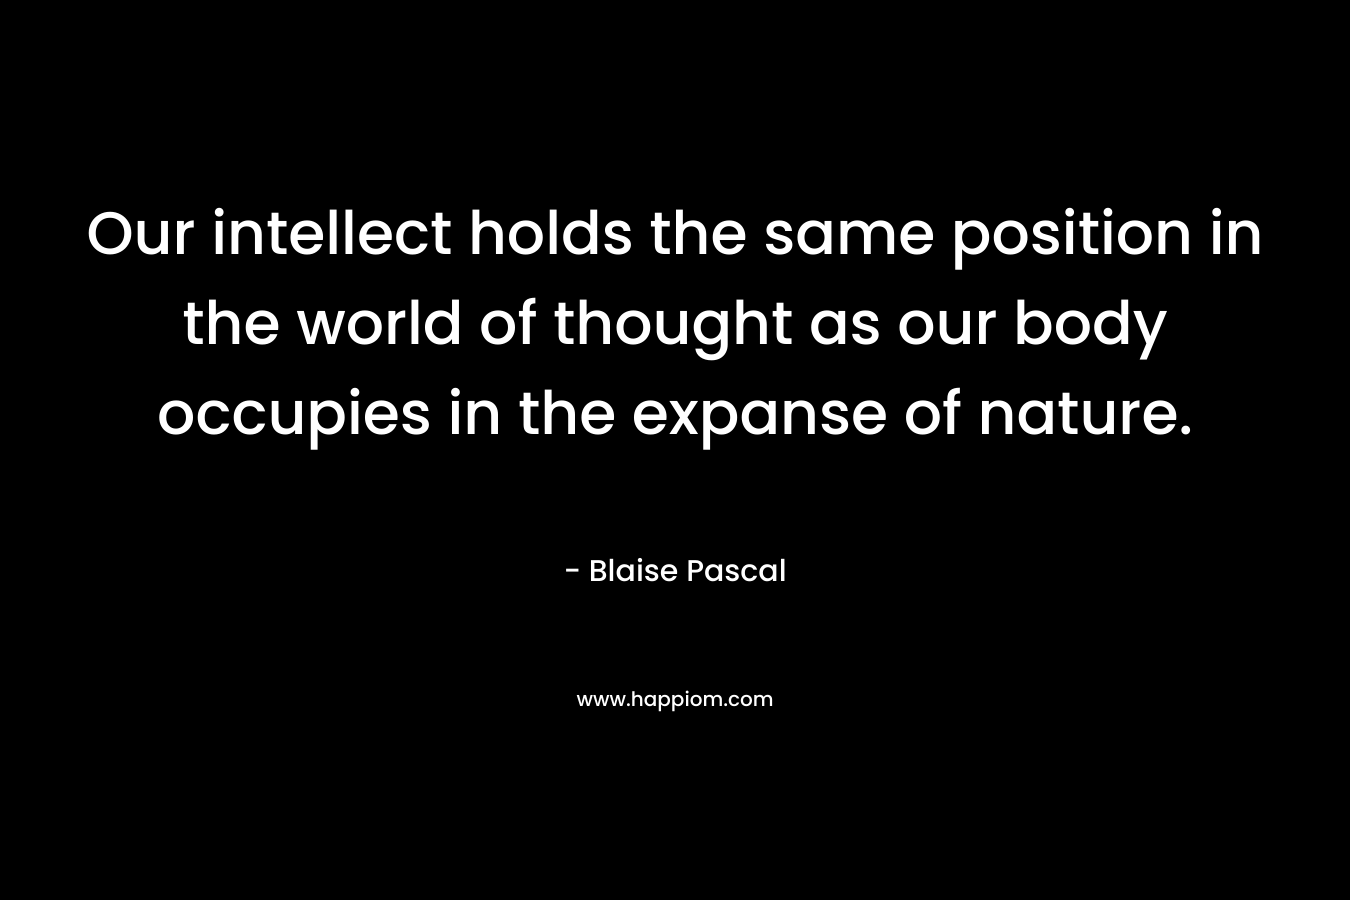 Our intellect holds the same position in the world of thought as our body occupies in the expanse of nature.